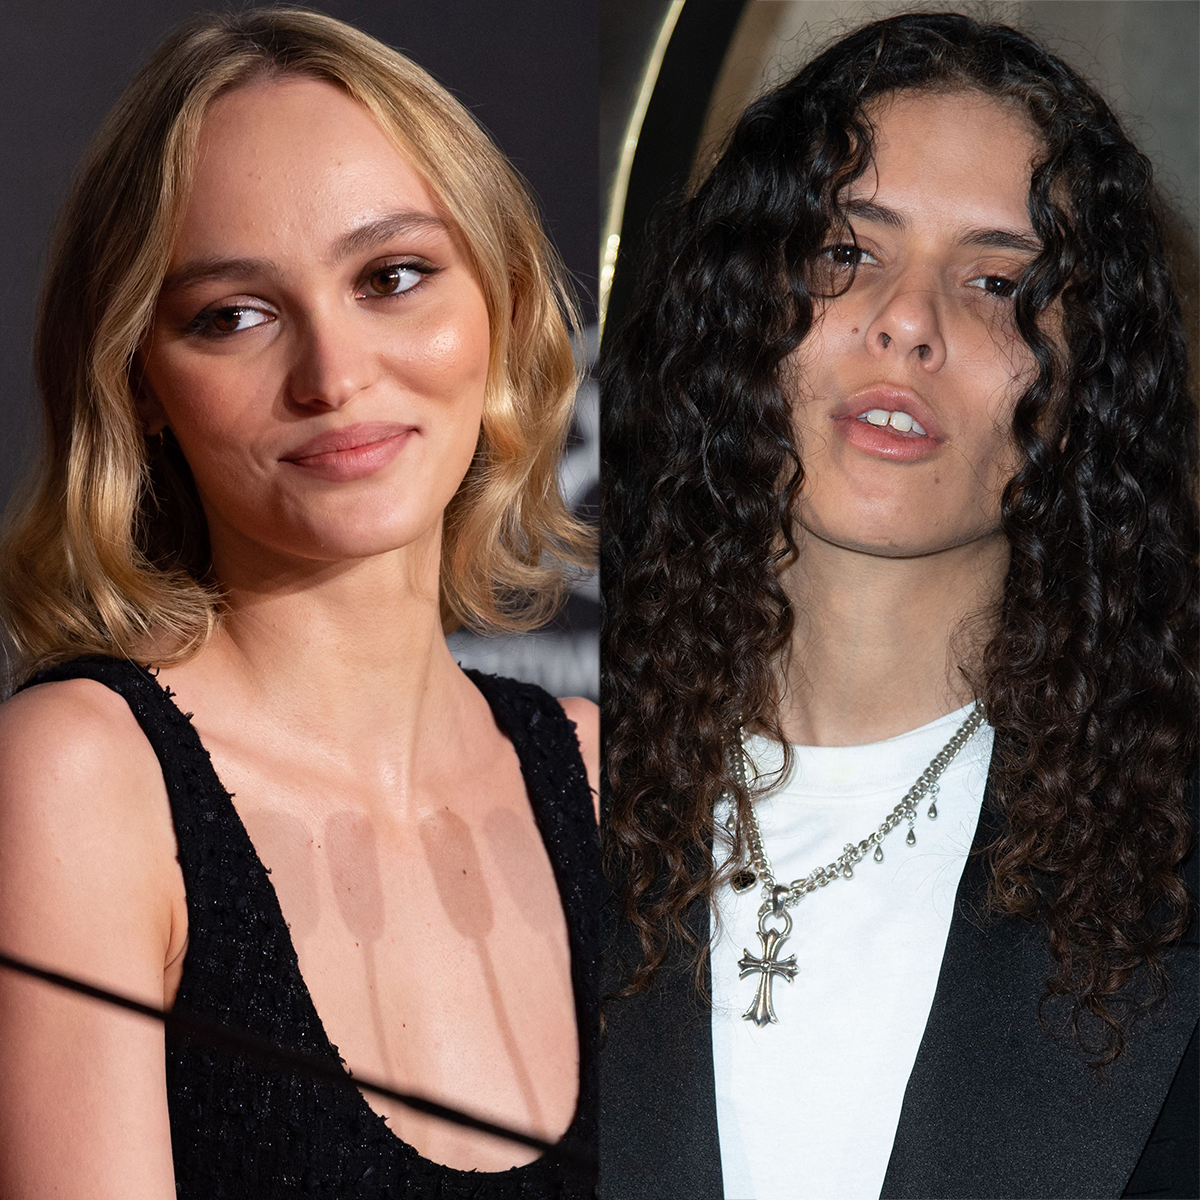 Lily Rose Depp And Girlfriend 070 Shake Serve Up Style On Date Night